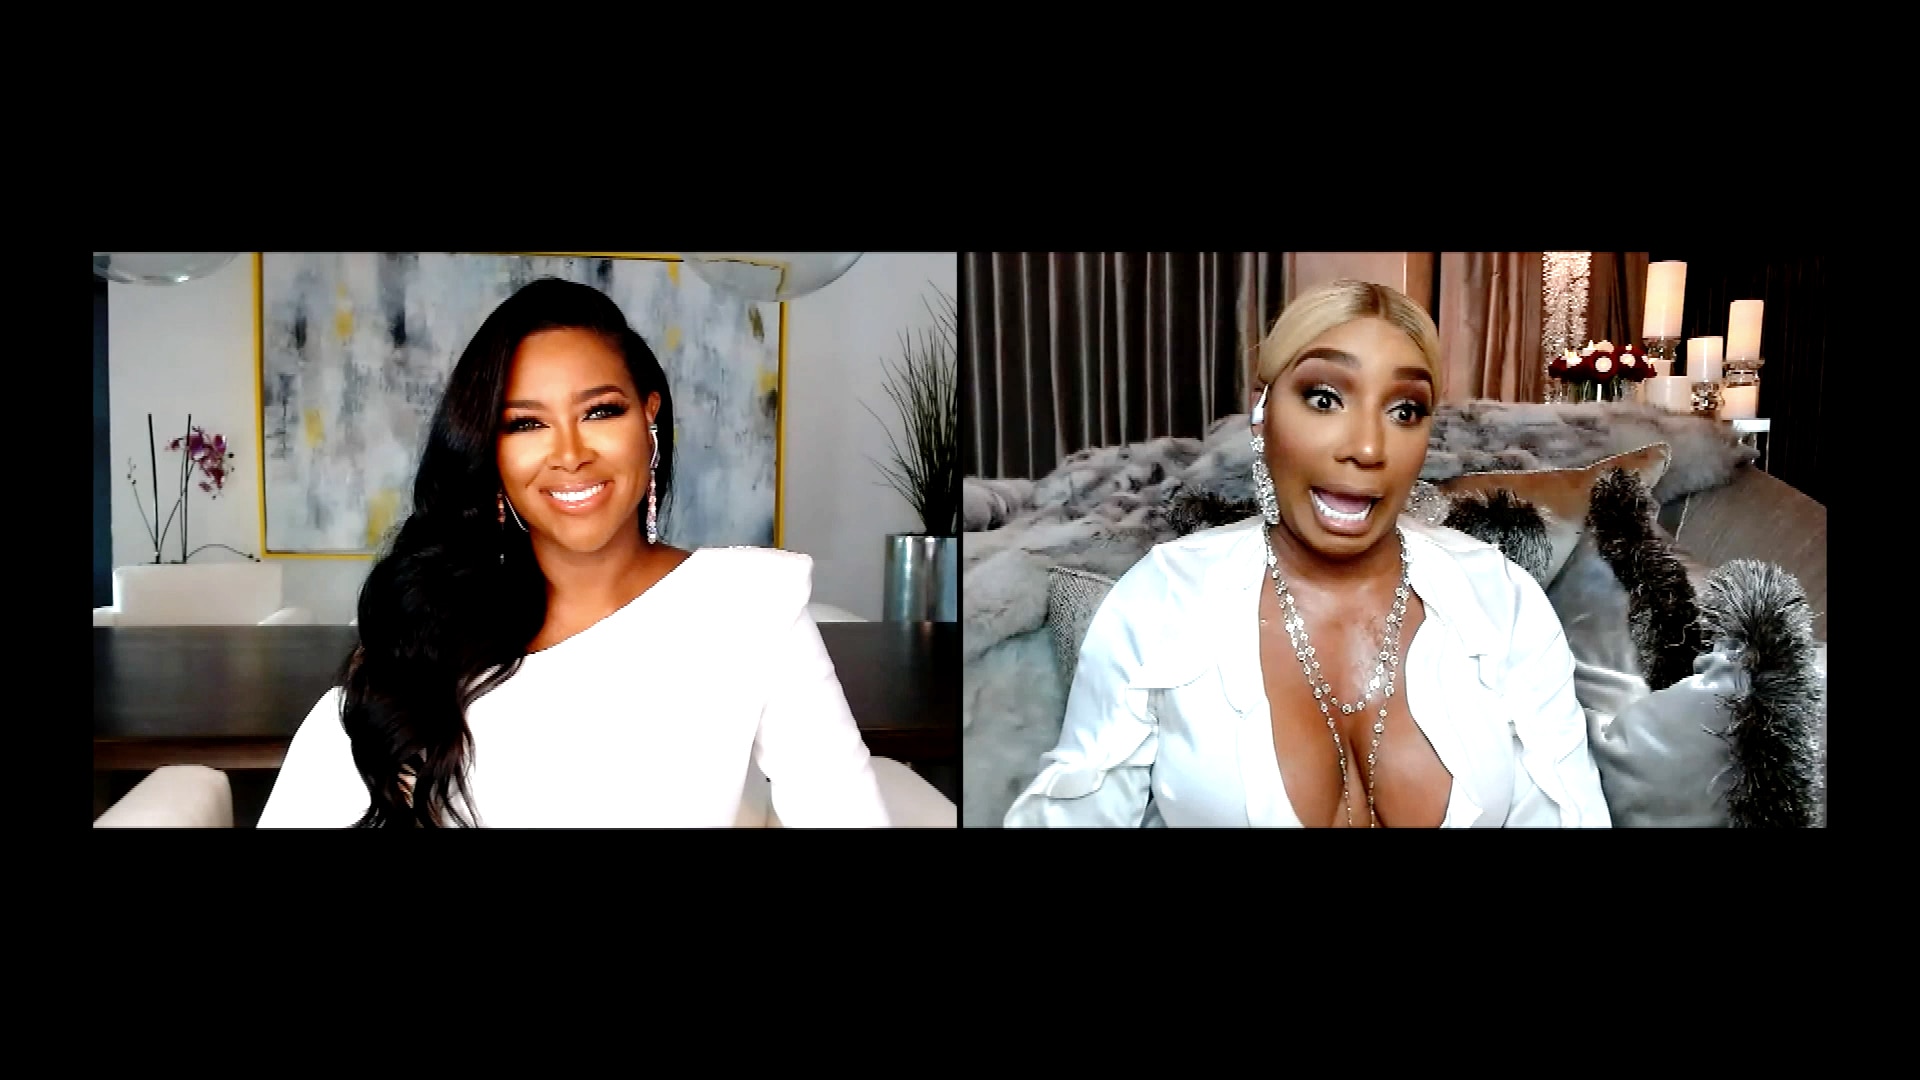 Watch Nene Leakes and Kenya Moore Clash Within the First Minute of the Reunion Taping! The Real Housewives of Atlanta Season 12